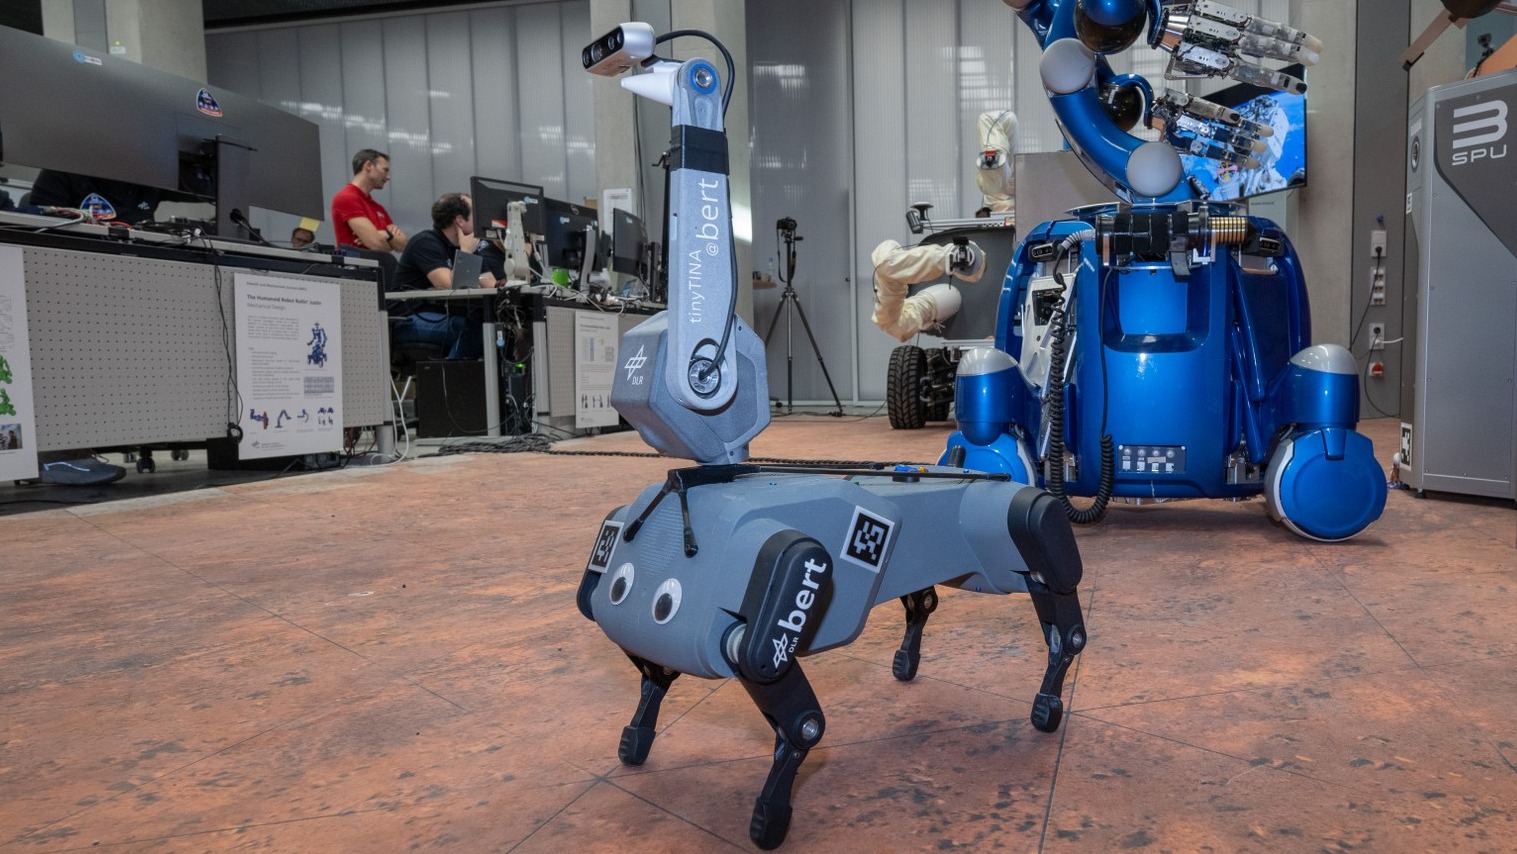 ISS astronaut controls Bert the dog-like robot on Earth during simulated Mars mission Space